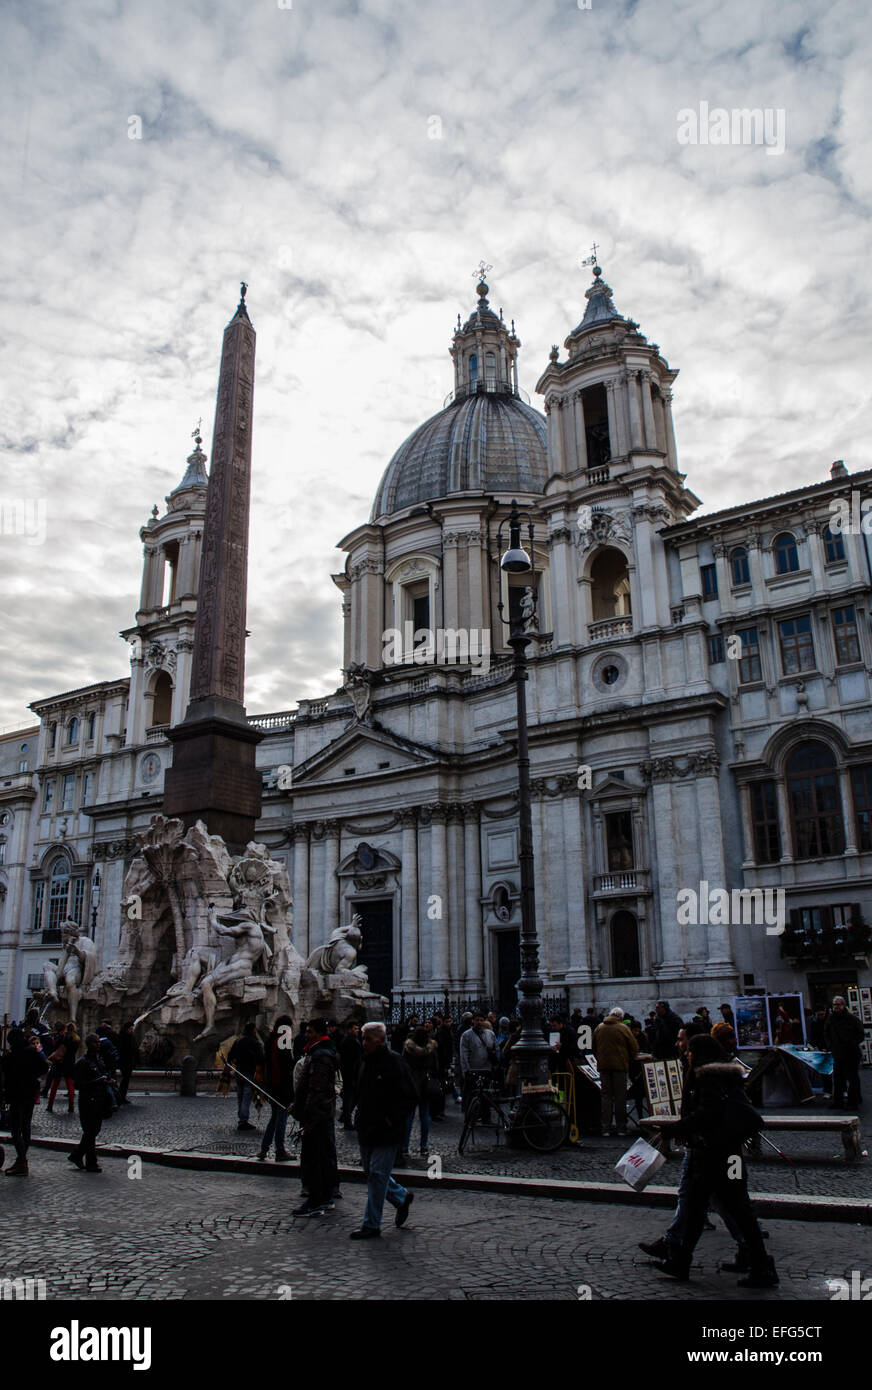 Details of Piazza Navona, Rome , Italy Stock Photo